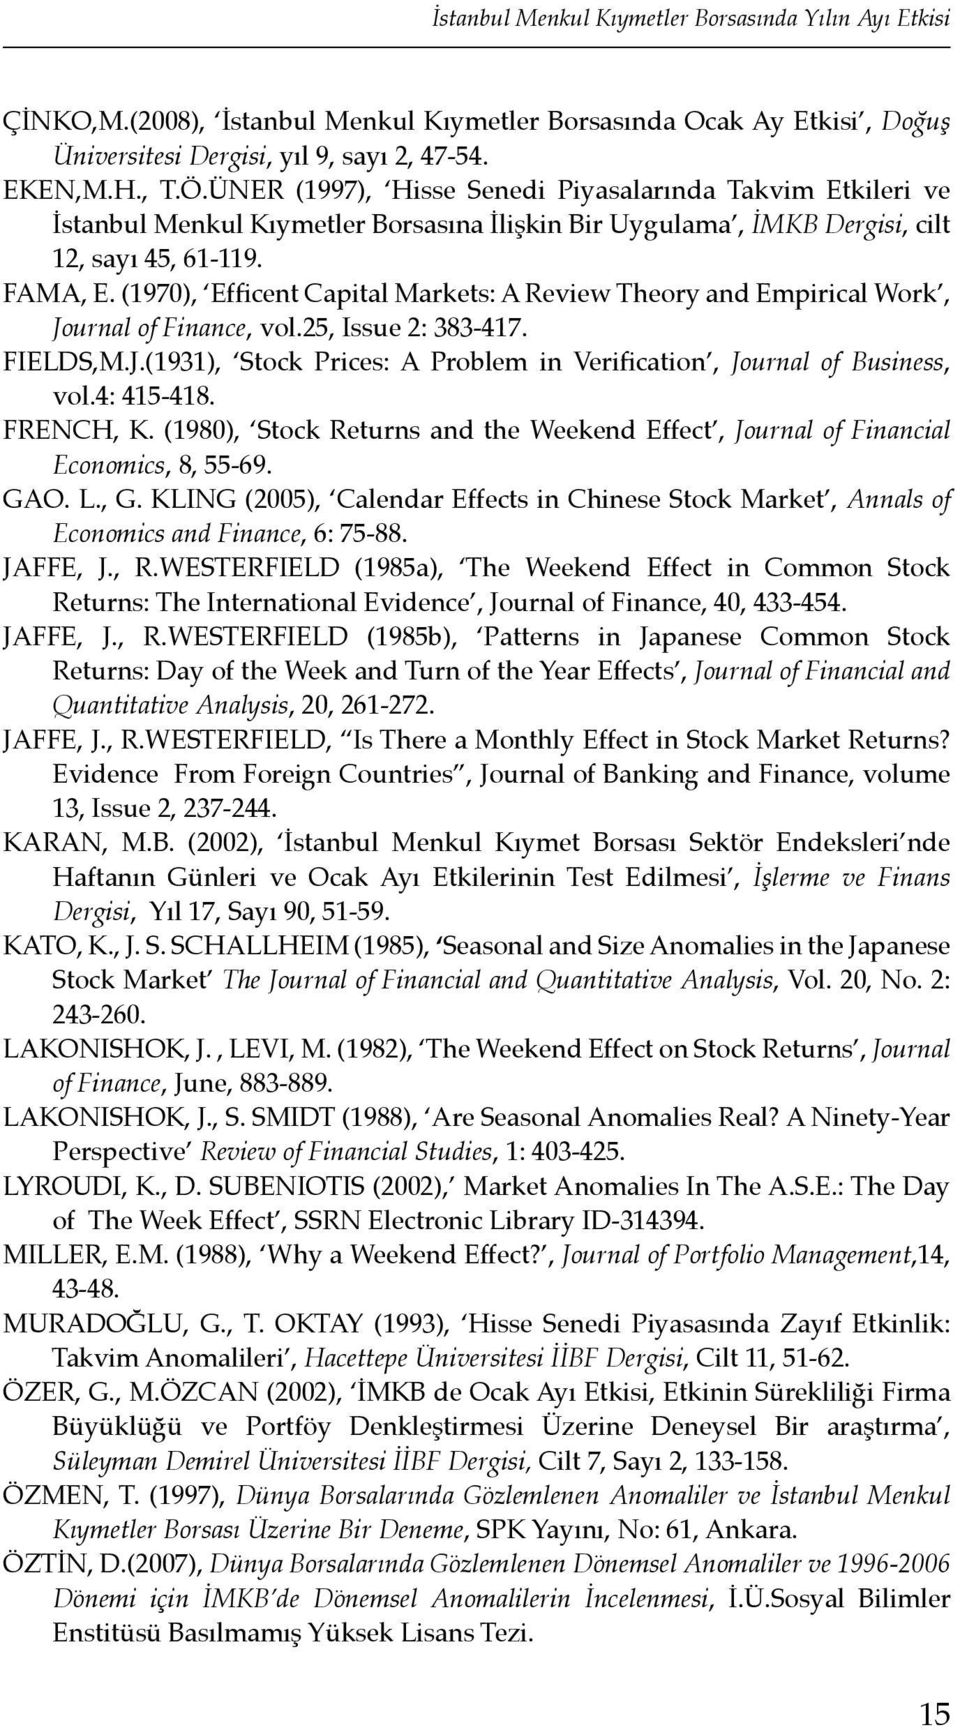 (1970), Efficent Capital Markets: A Review Theory and Empirical Work, Journal of Finance, vol.25, Issue 2: 383-417. FIELDS,M.J.(1931), Stock Prices: A Problem in Verification, Journal of Business, vol.